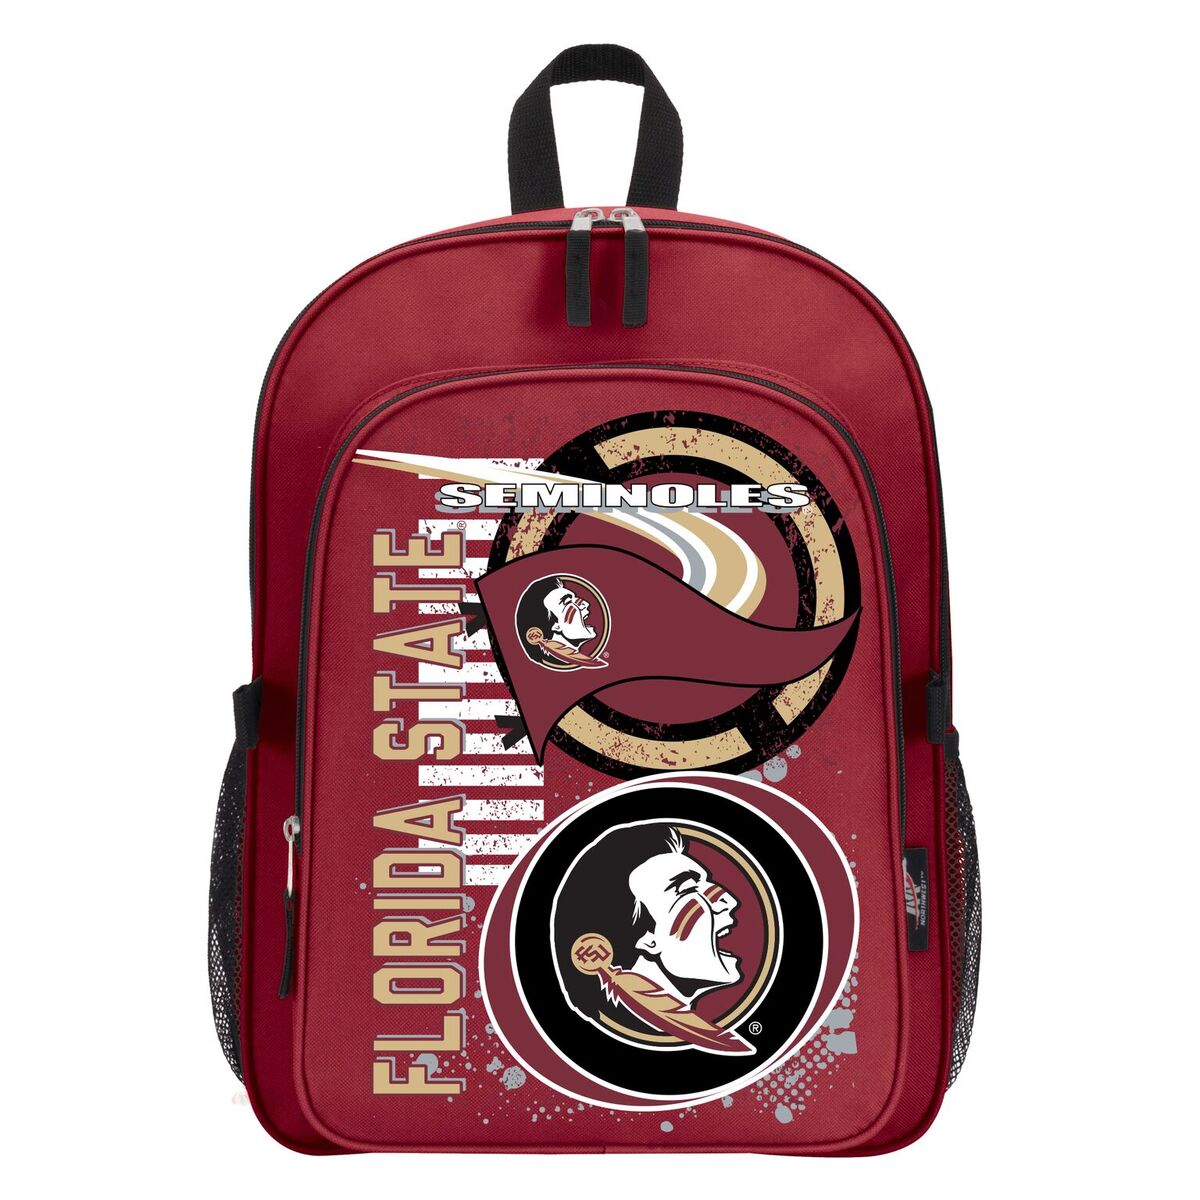 Florida State Seminoles "Accelerator" Backpack and Lunch Kit Set - image 4 of 9